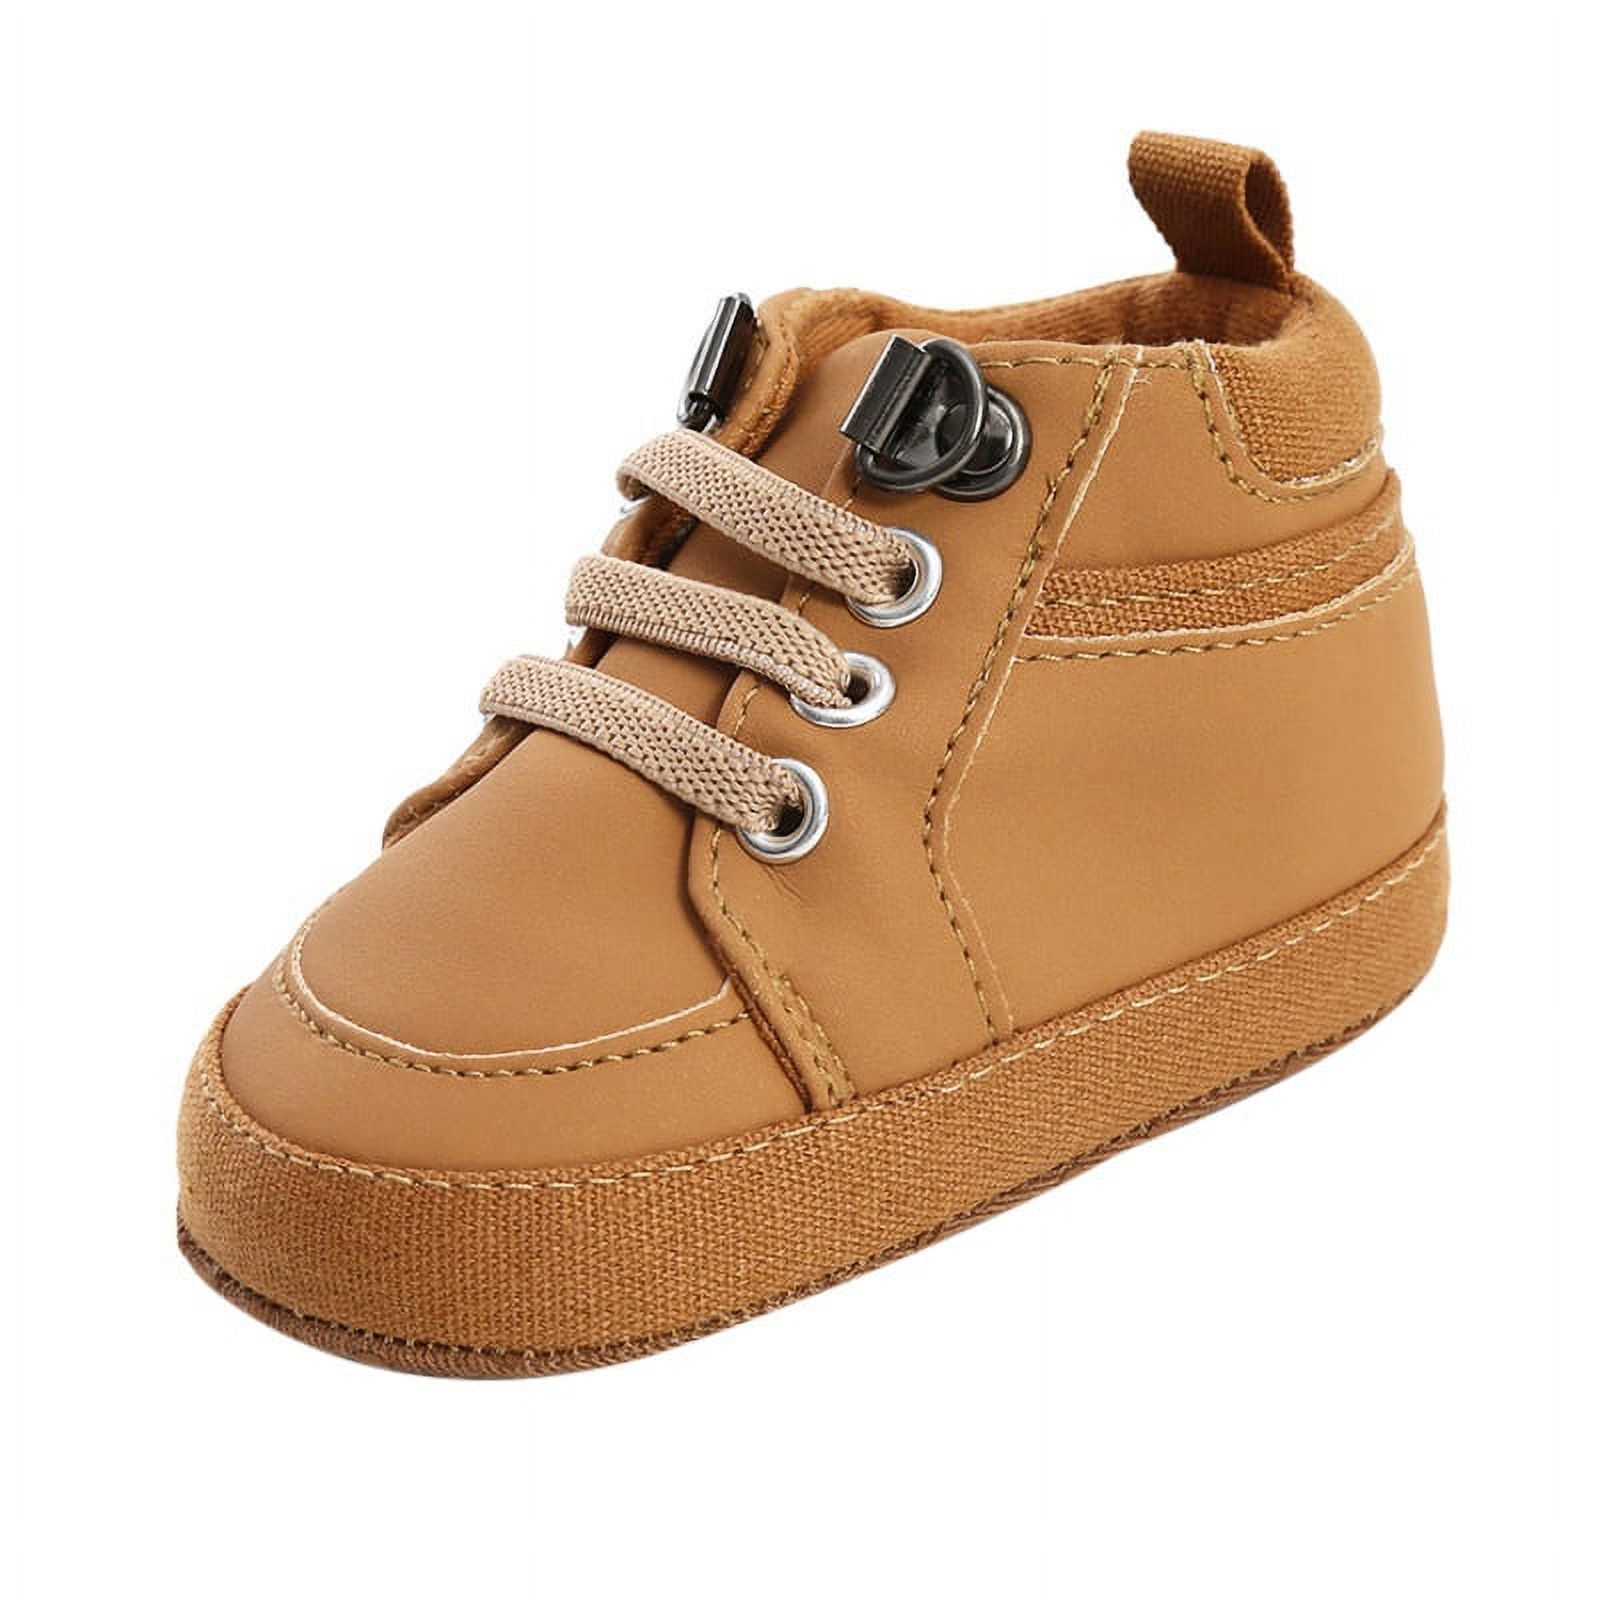 Baby Girls Boys Walking Shoes Toddler Infant First Walker Soft Sole High-Top Ankle Sneakers Newborn Crib Shoe - image 1 of 7